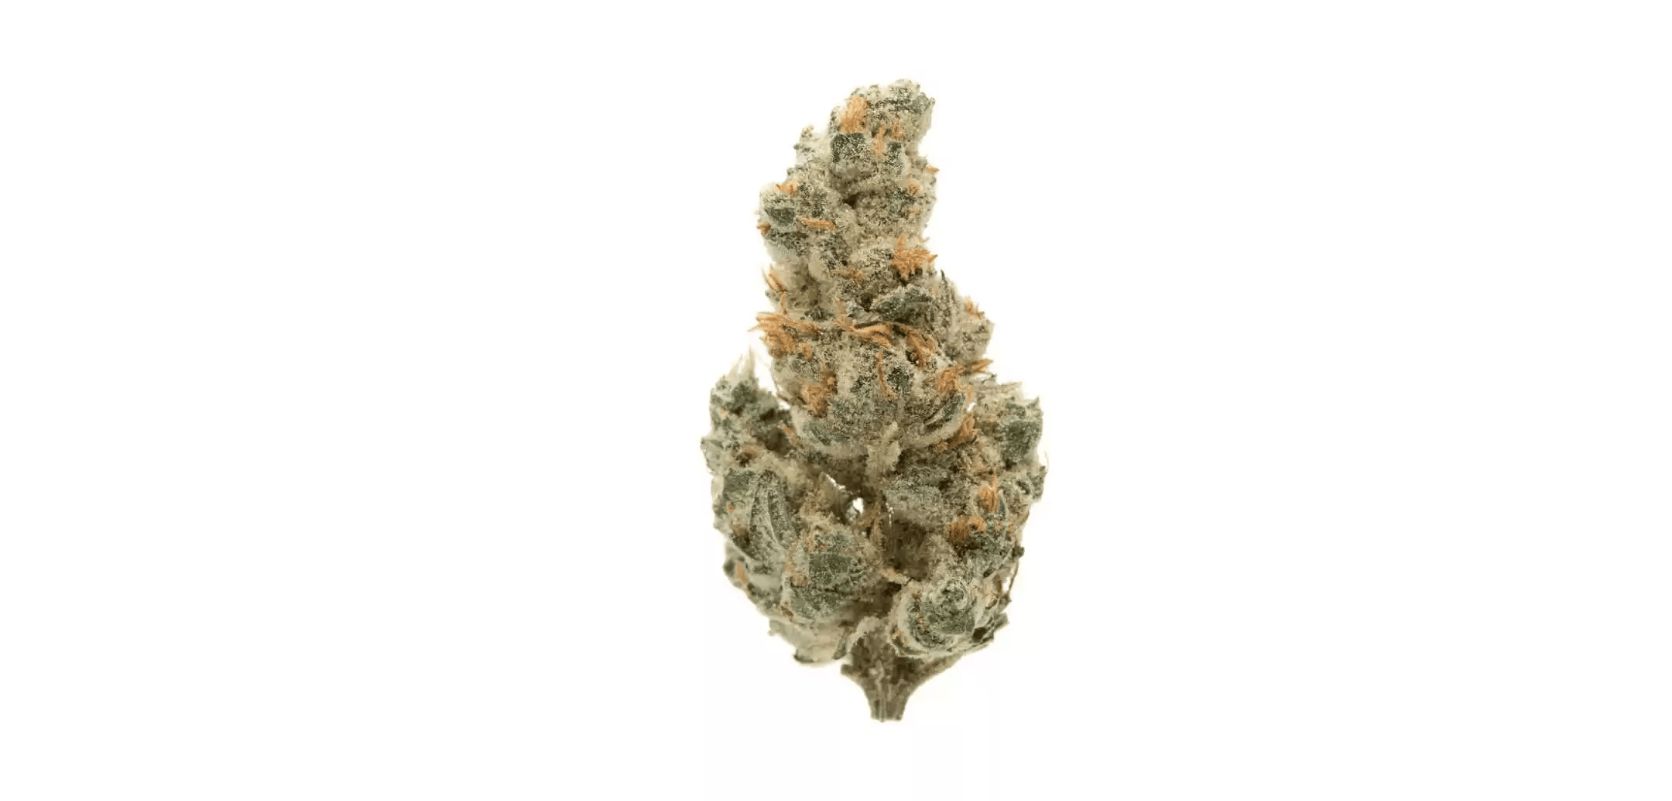 Now that you're acquainted with the merits of GMO Cookies, the question arises – where to find this exceptional strain? 